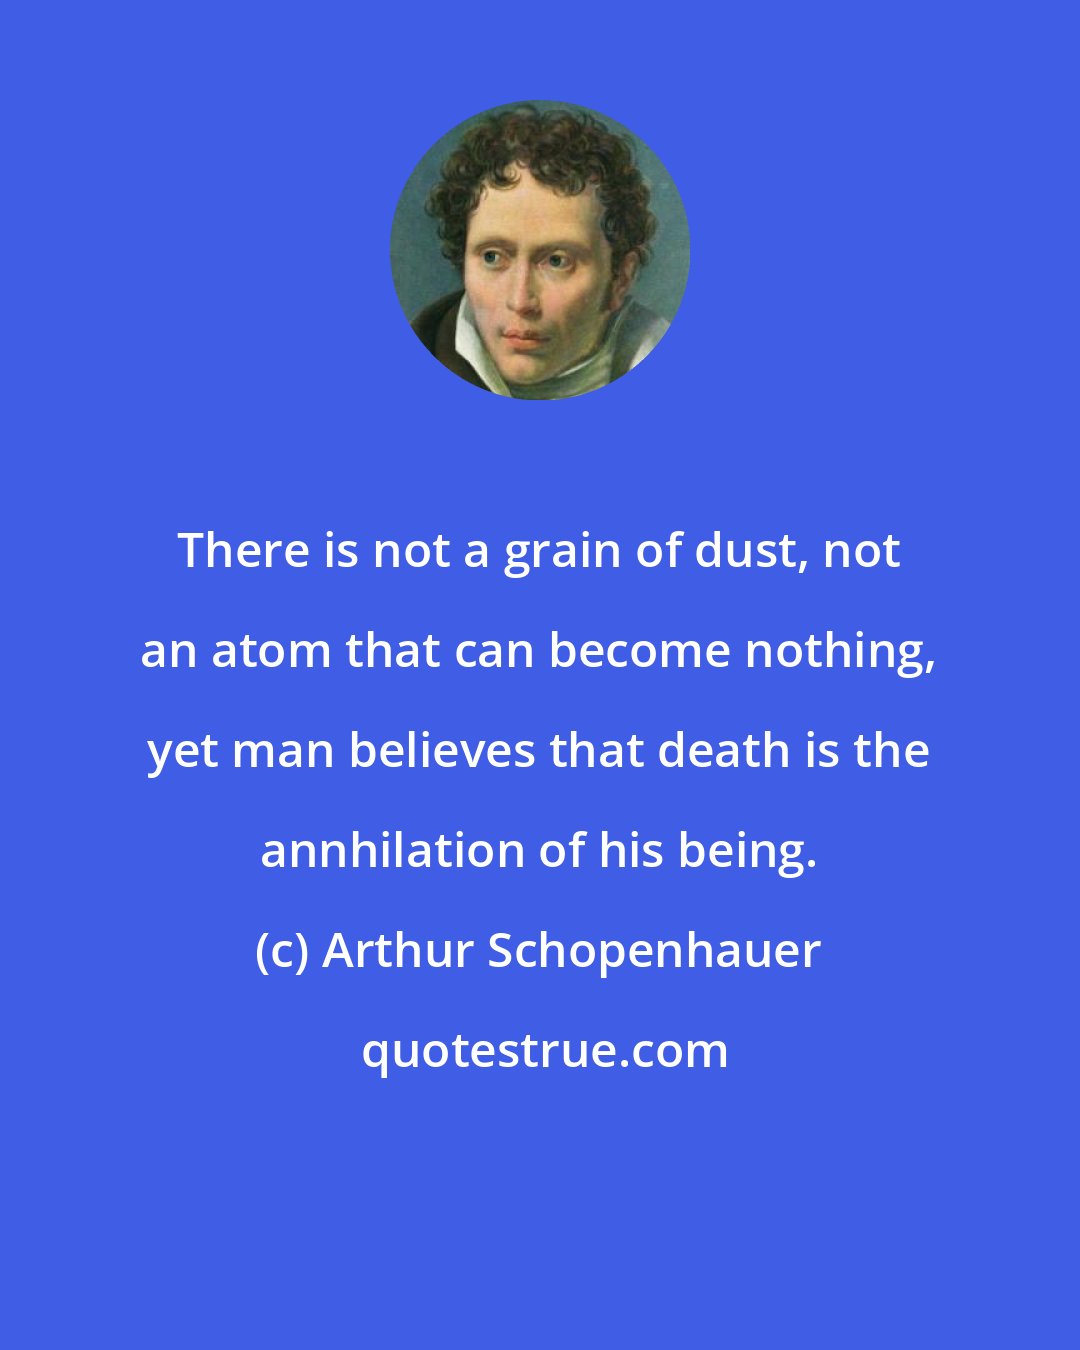 Arthur Schopenhauer: There is not a grain of dust, not an atom that can become nothing, yet man believes that death is the annhilation of his being.